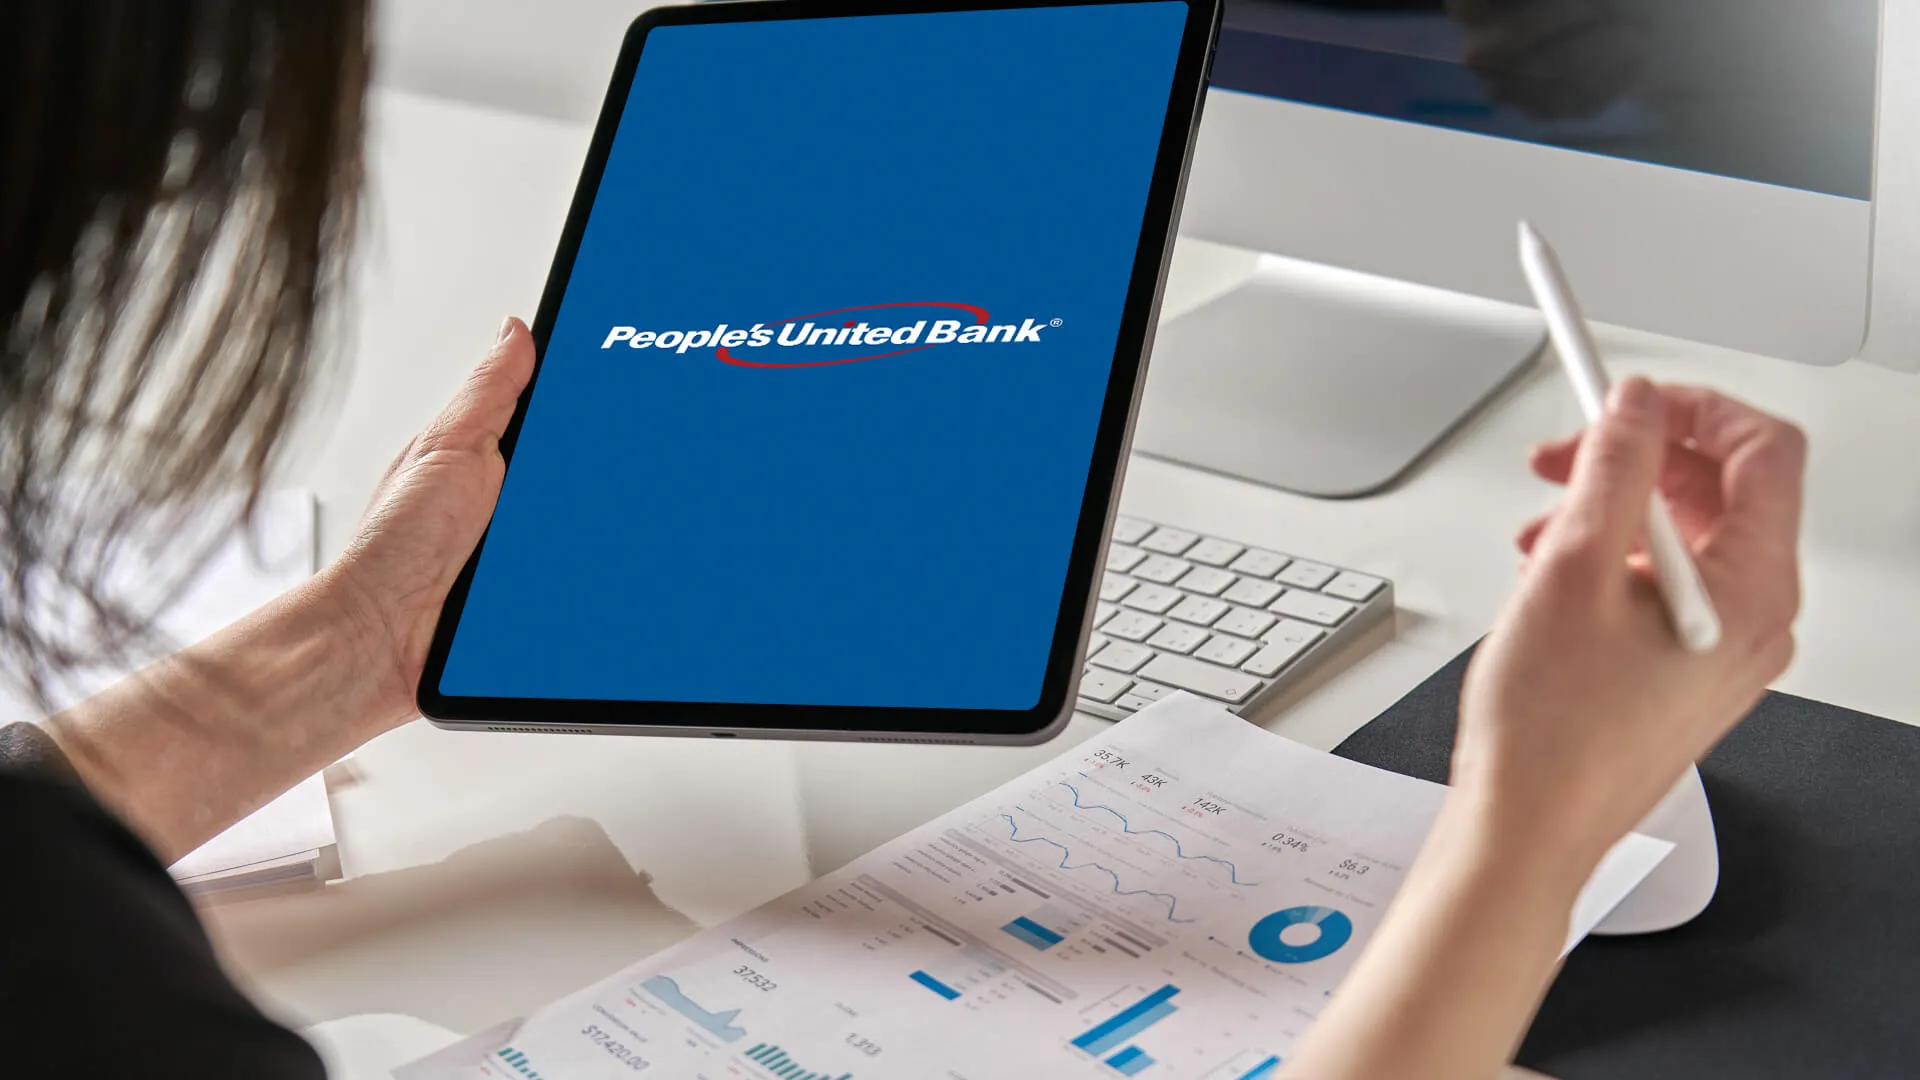 People's United bank mobile app